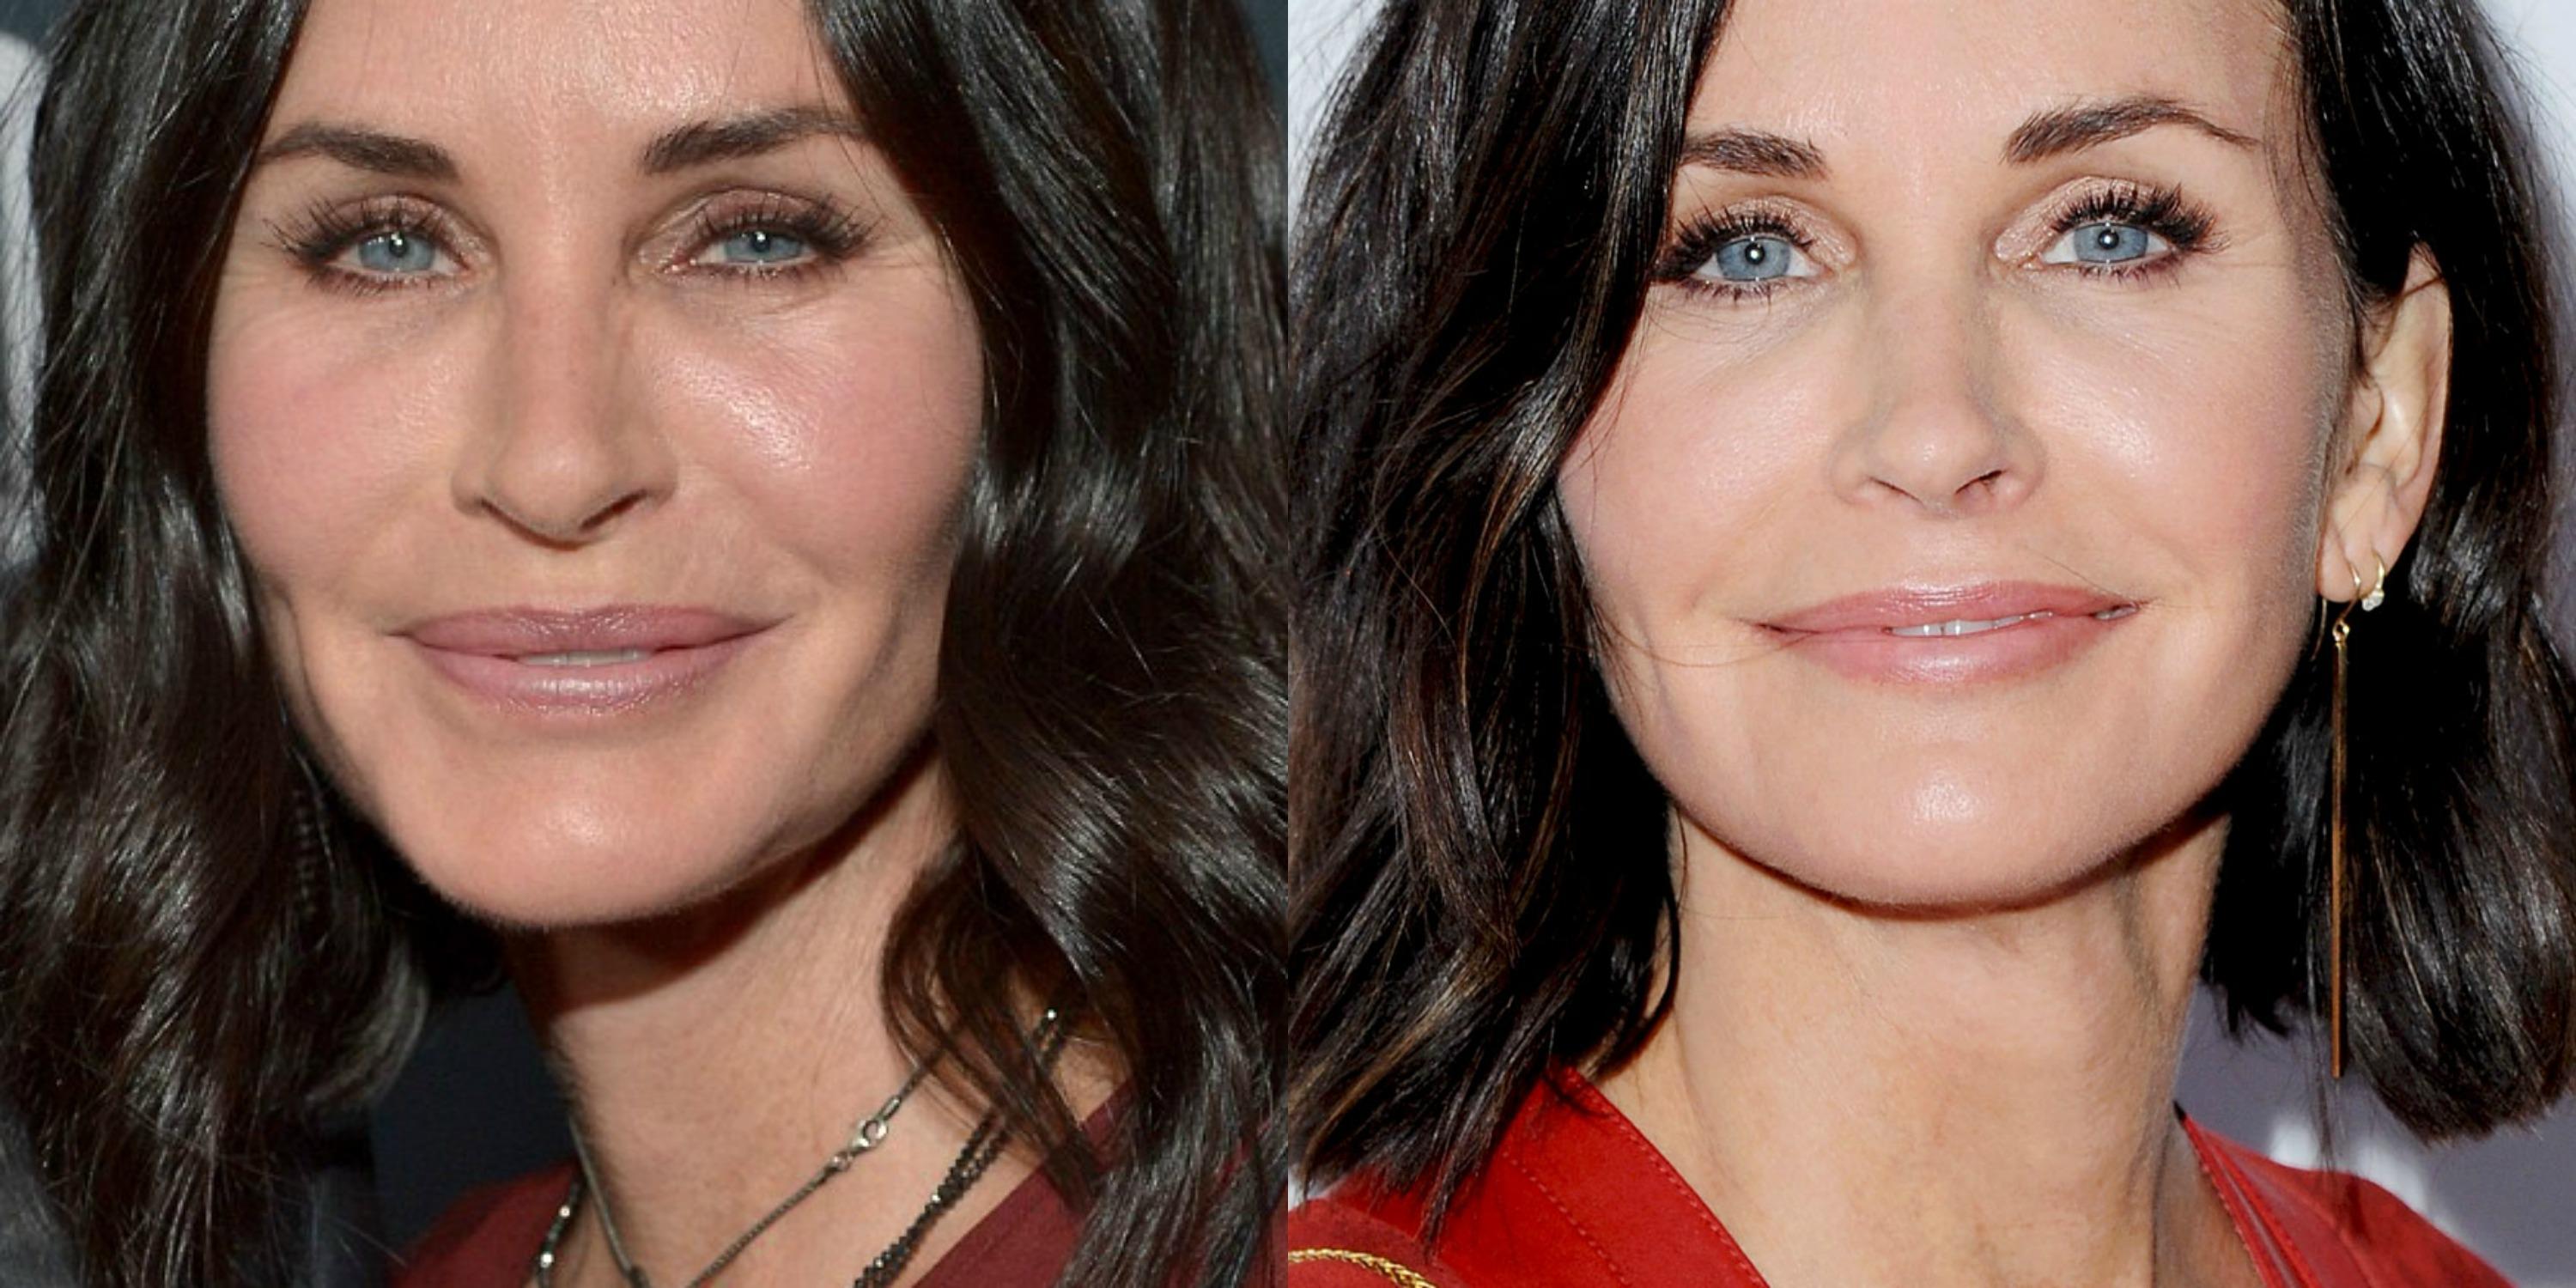 Friends courteney cox too much filler everyoung